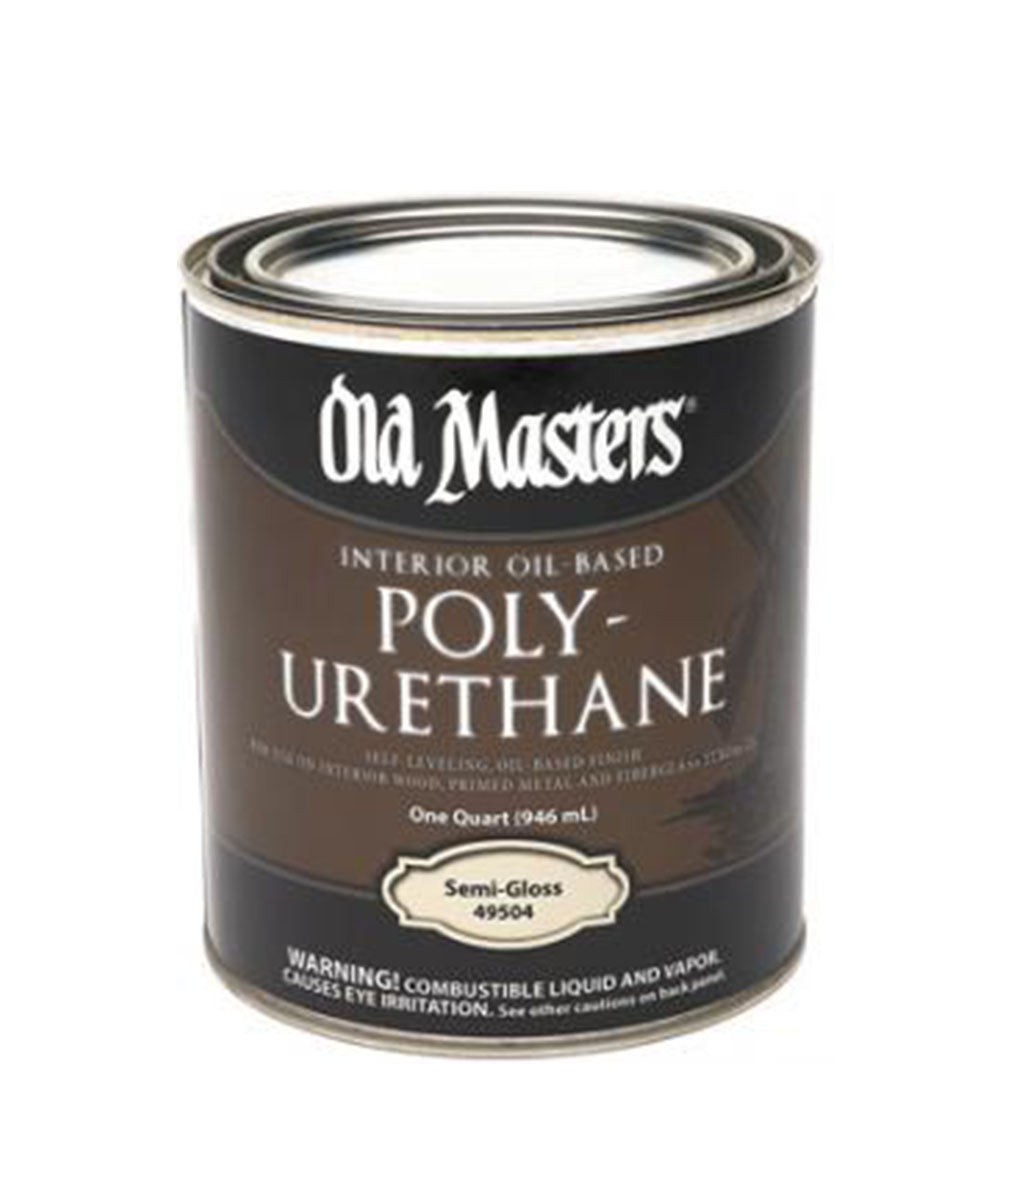 Old Masters Interior Oil-Based Polyurethane, available at Clement's Paint in Austin, TX.